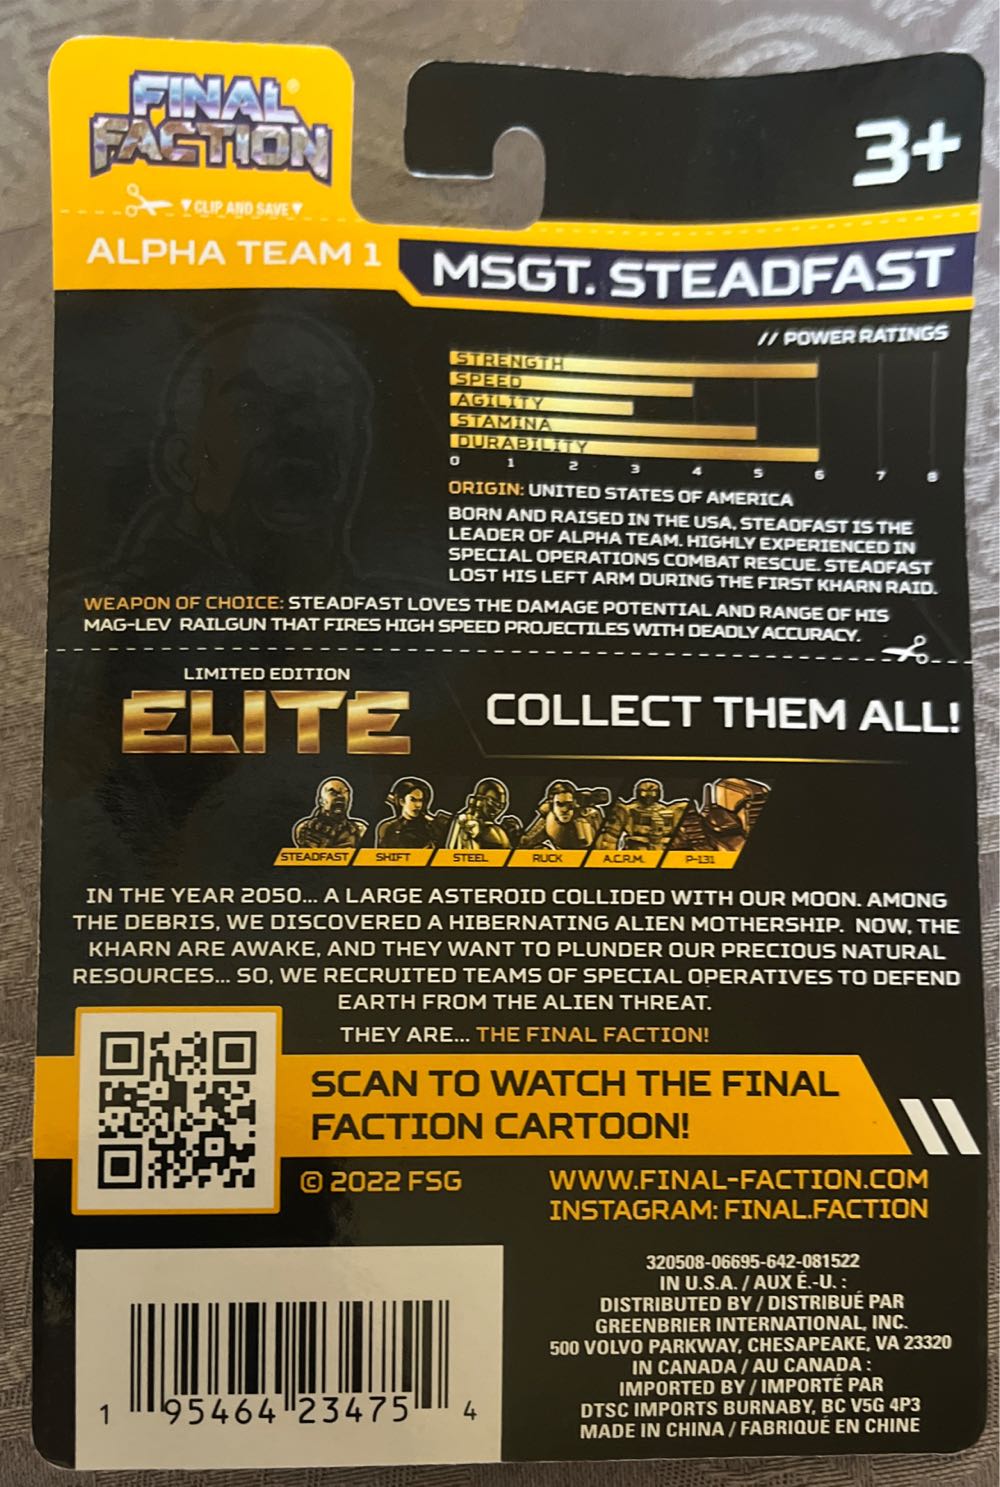 Elite Msgt. Steadfast - Greenbrier International, Inc. (Final Faction) action figure collectible [Barcode 195464234754] - Main Image 2